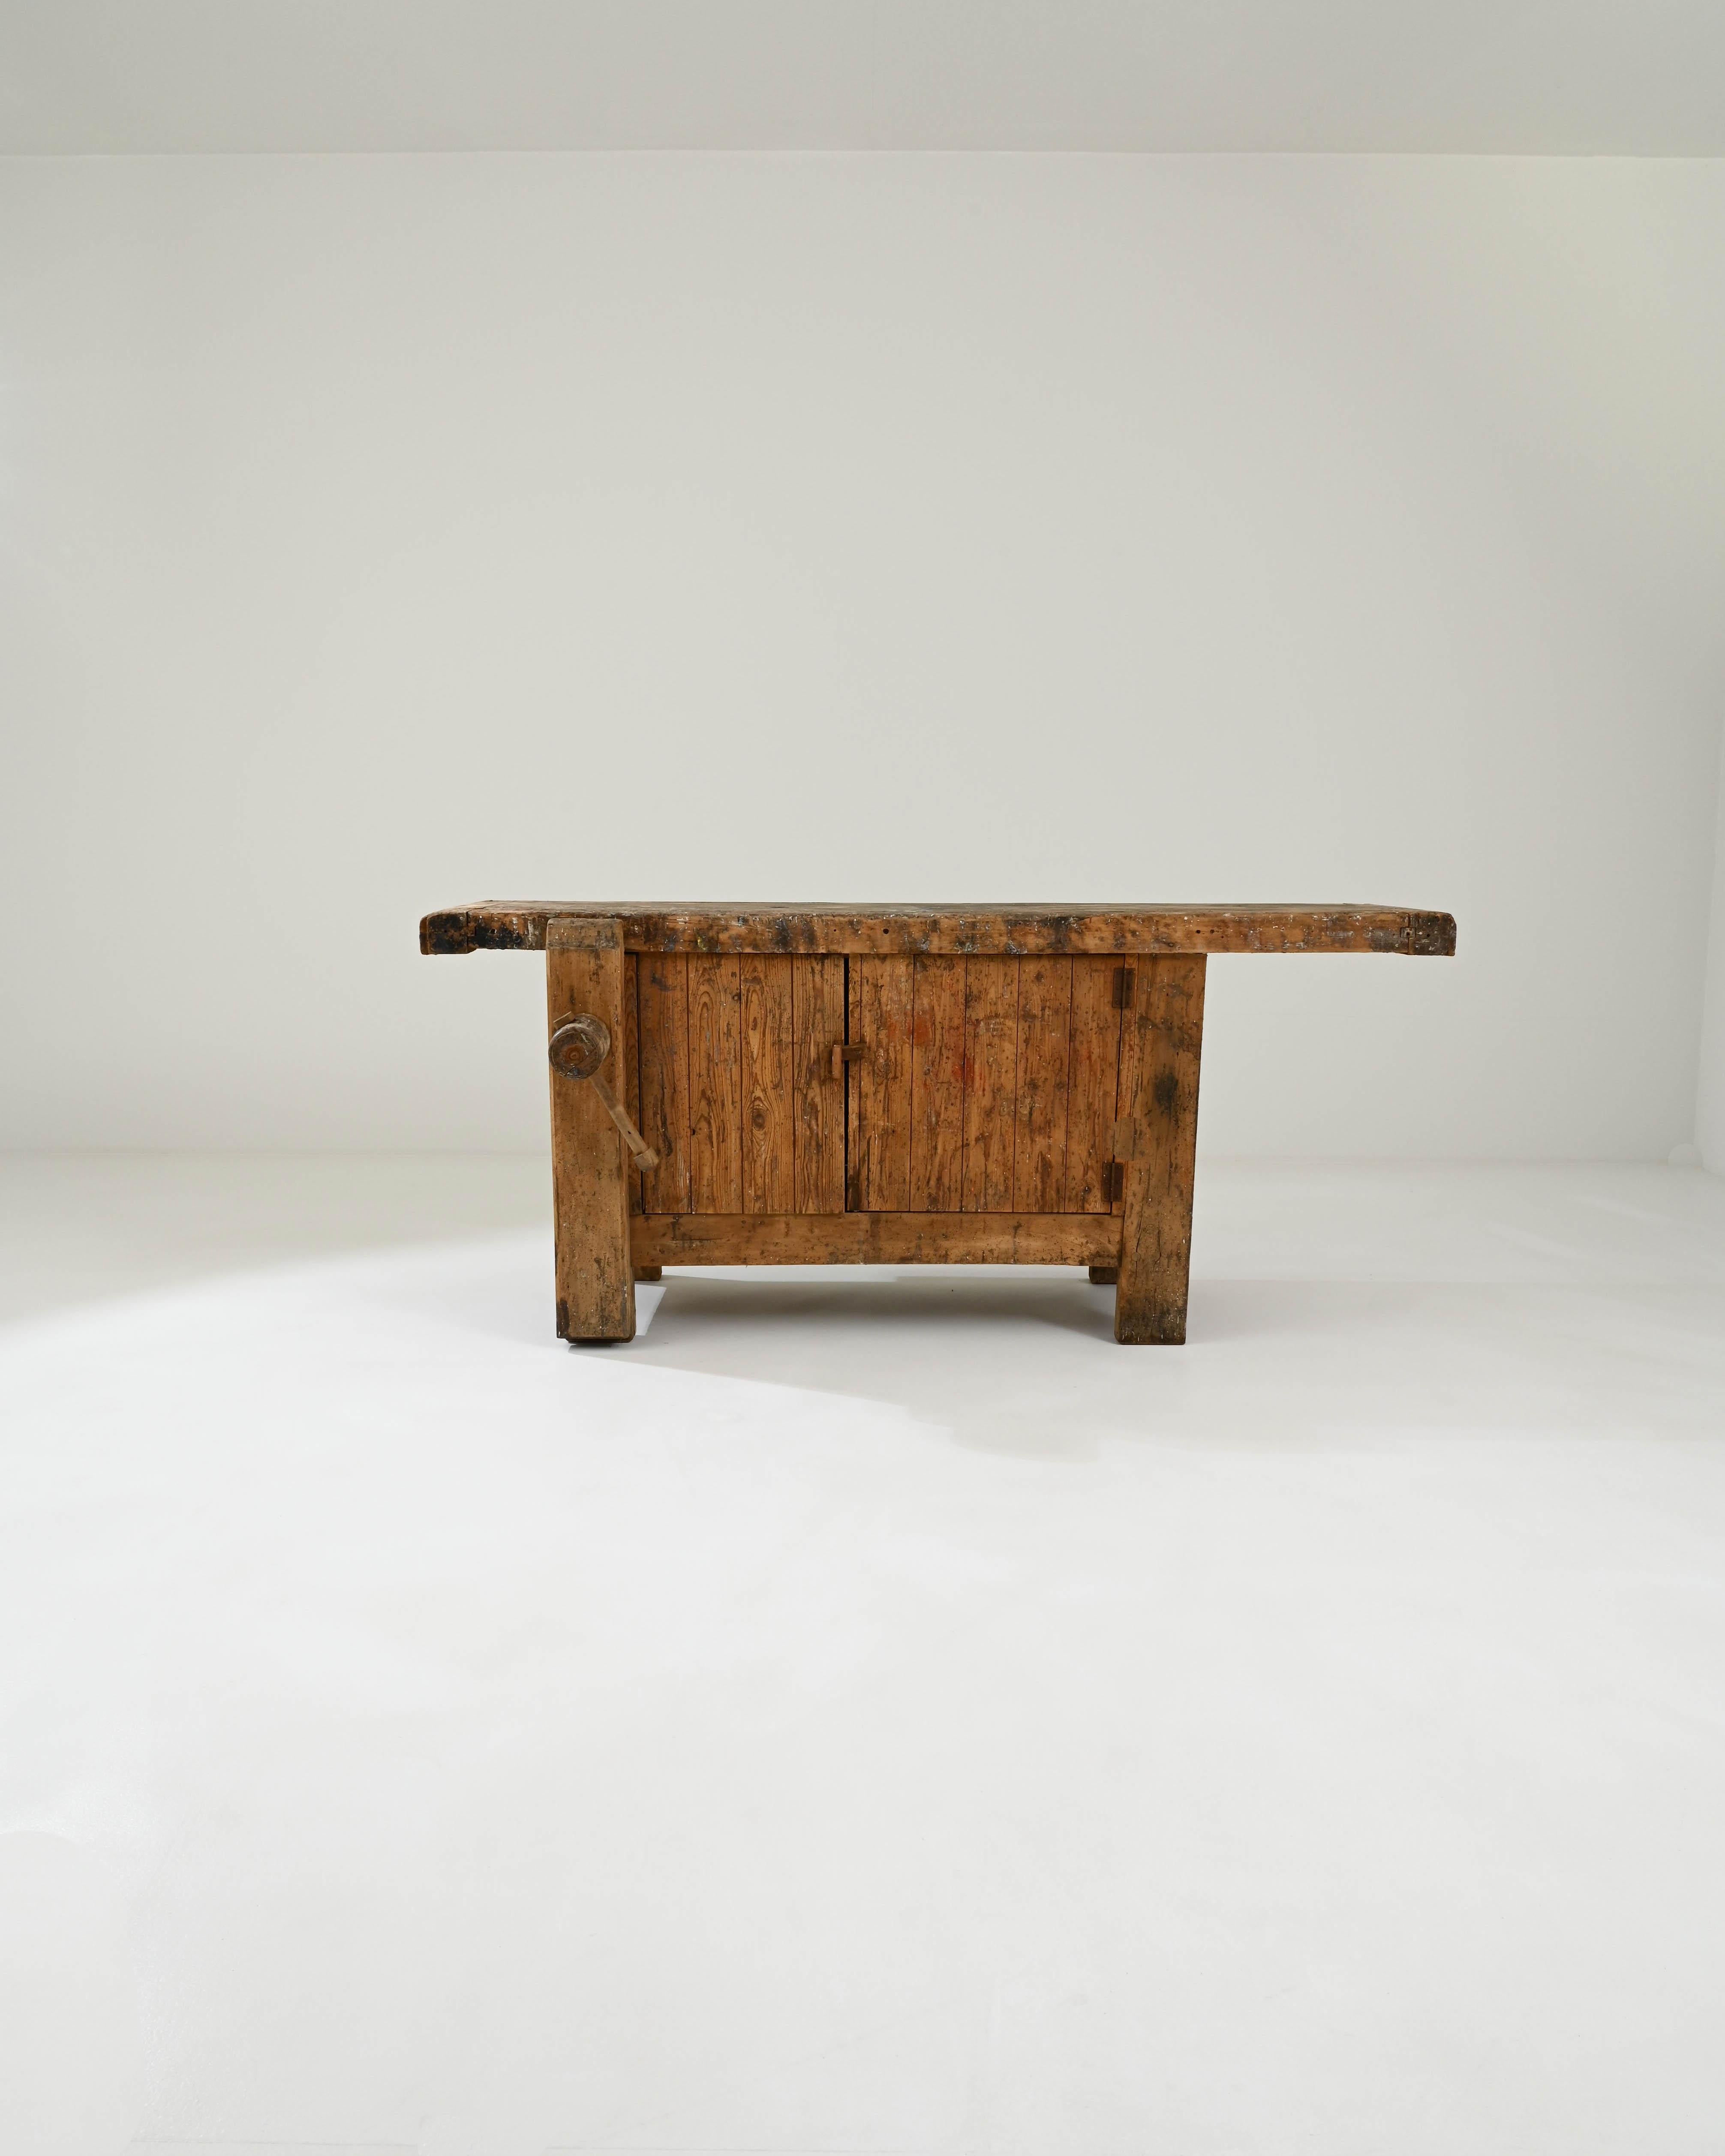 A wooden work table created in early 20th century Belgium. Hewn lumber compiled together in a sturdy and efficient construction, this giant of a work table greets one with a focused poise. A solid plank of hardwood, framed in by conjoining boards